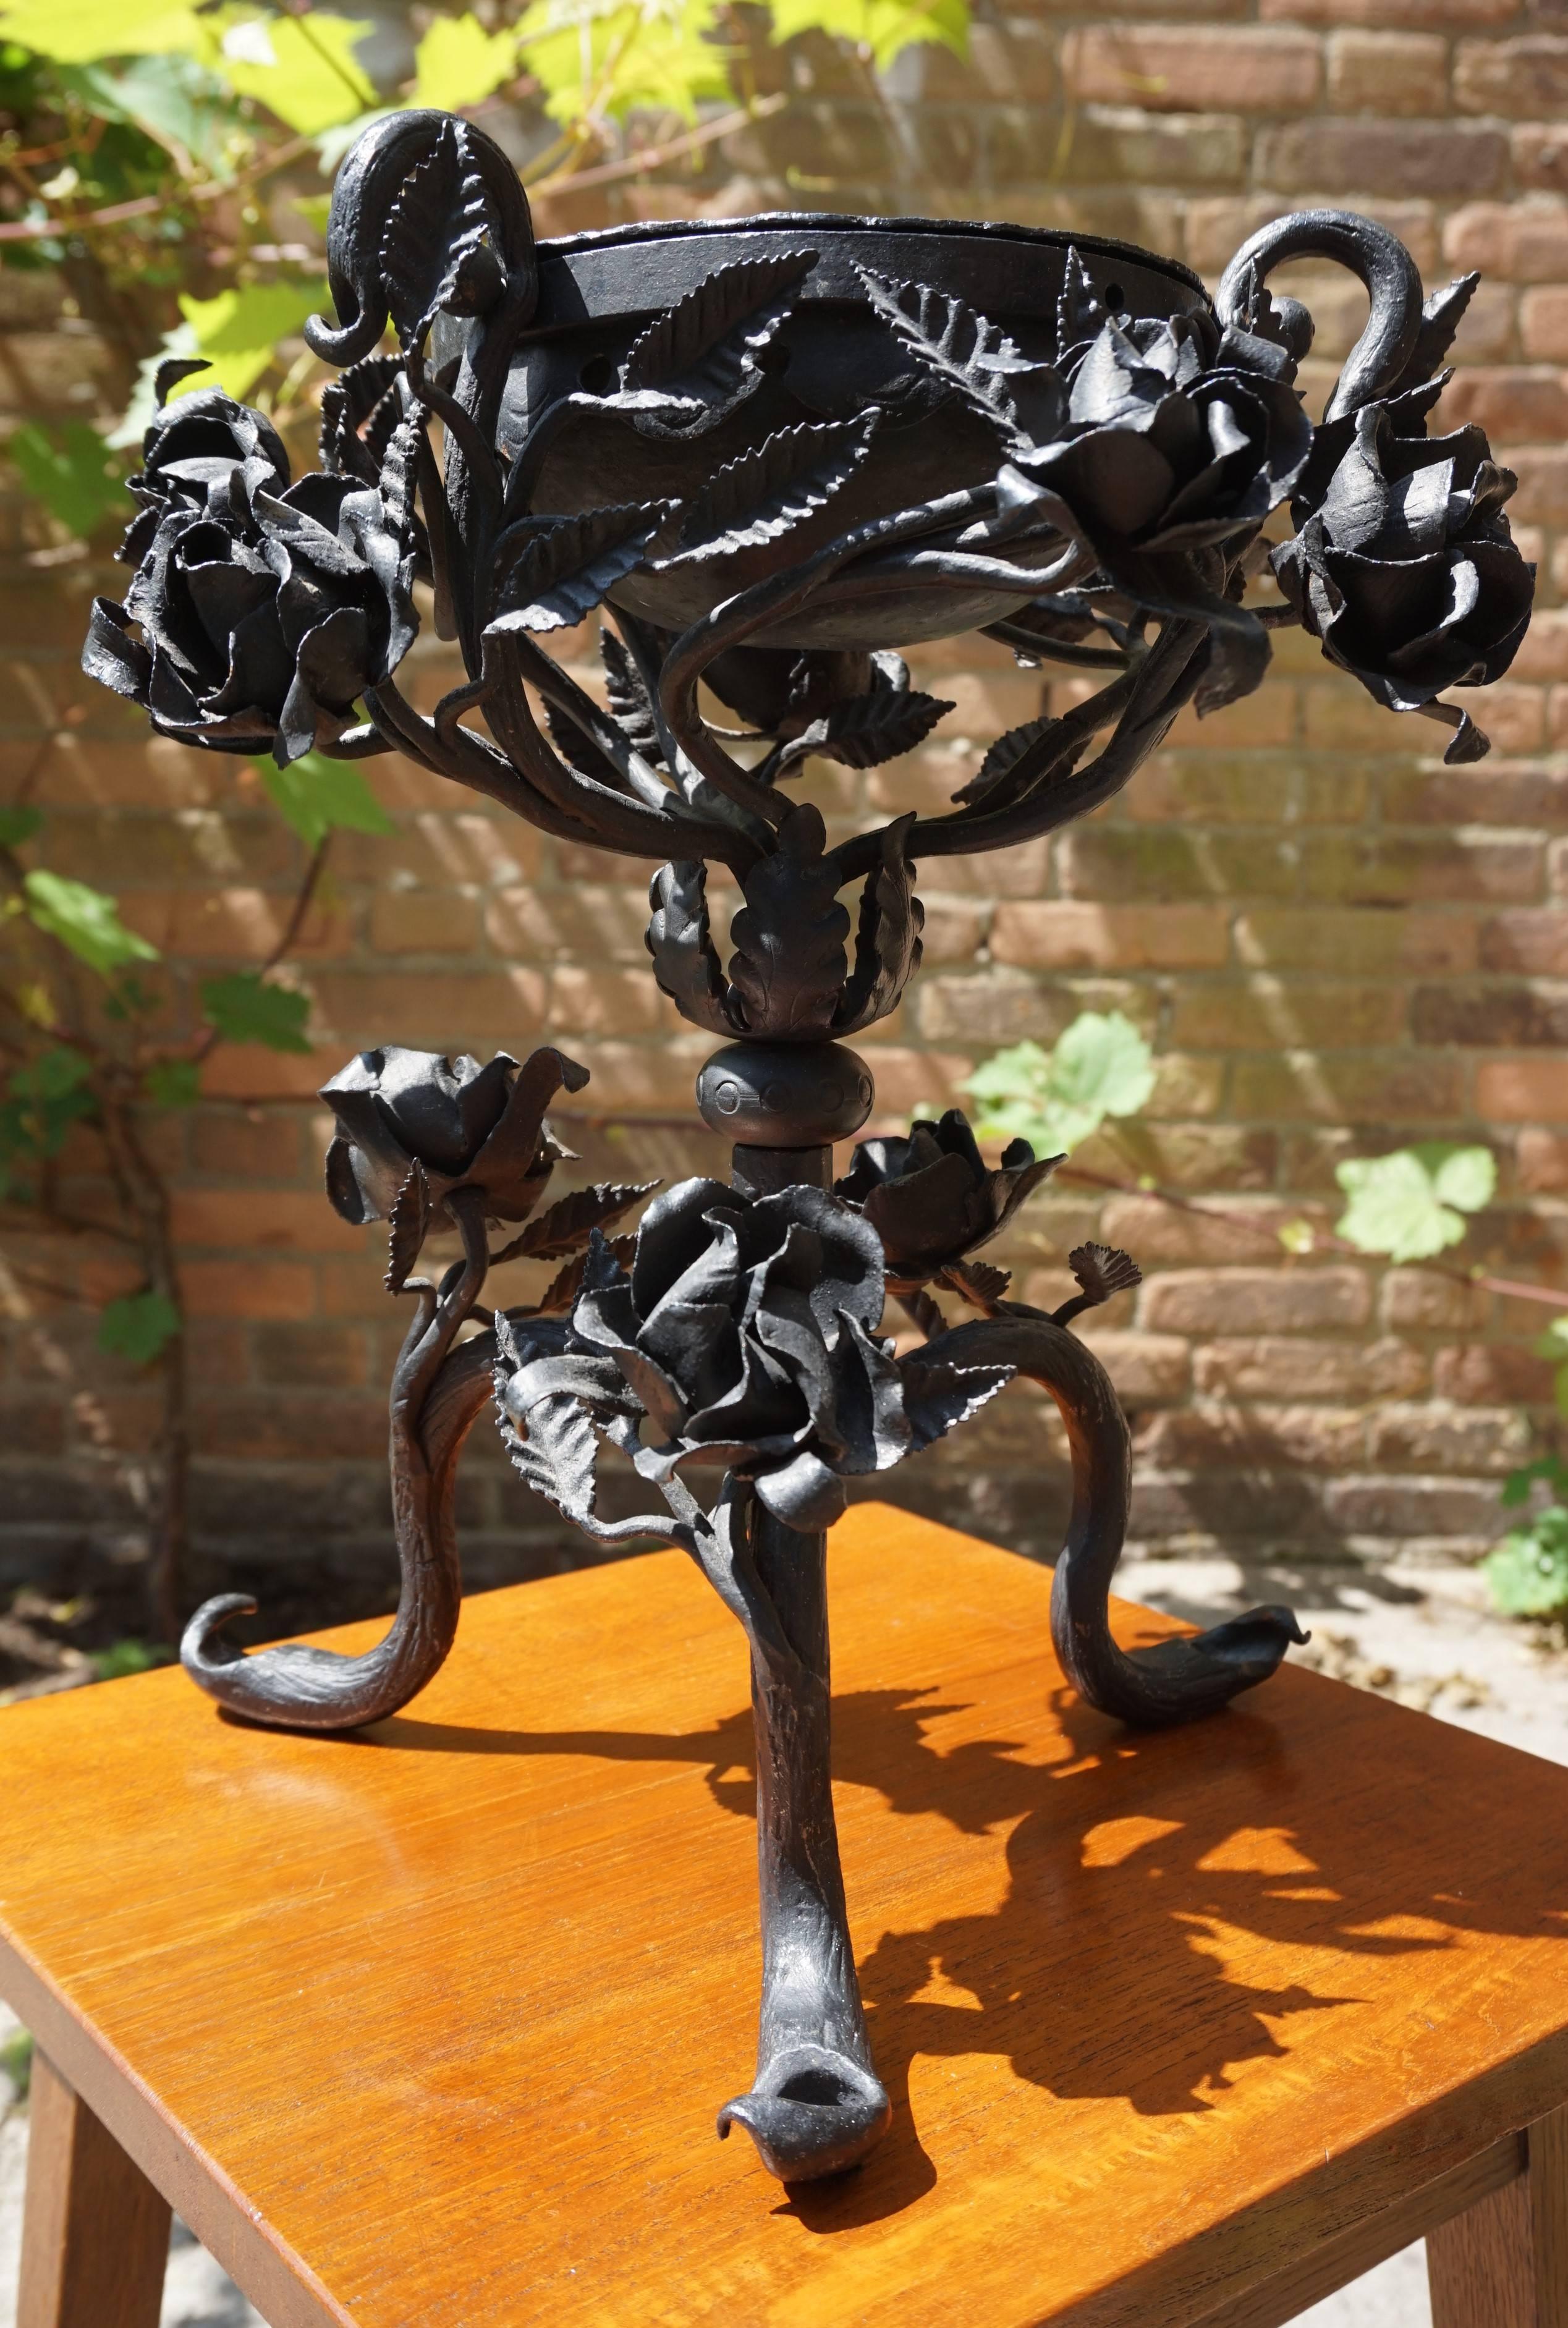 Hand-forged with fine quality roses centrepiece.

Because of the many different and detailed roses and the demountable, hand-hammered bowl on top, we have nicknamed this antique 'the rose bowl'. Although we cannot know for sure, we believe that this